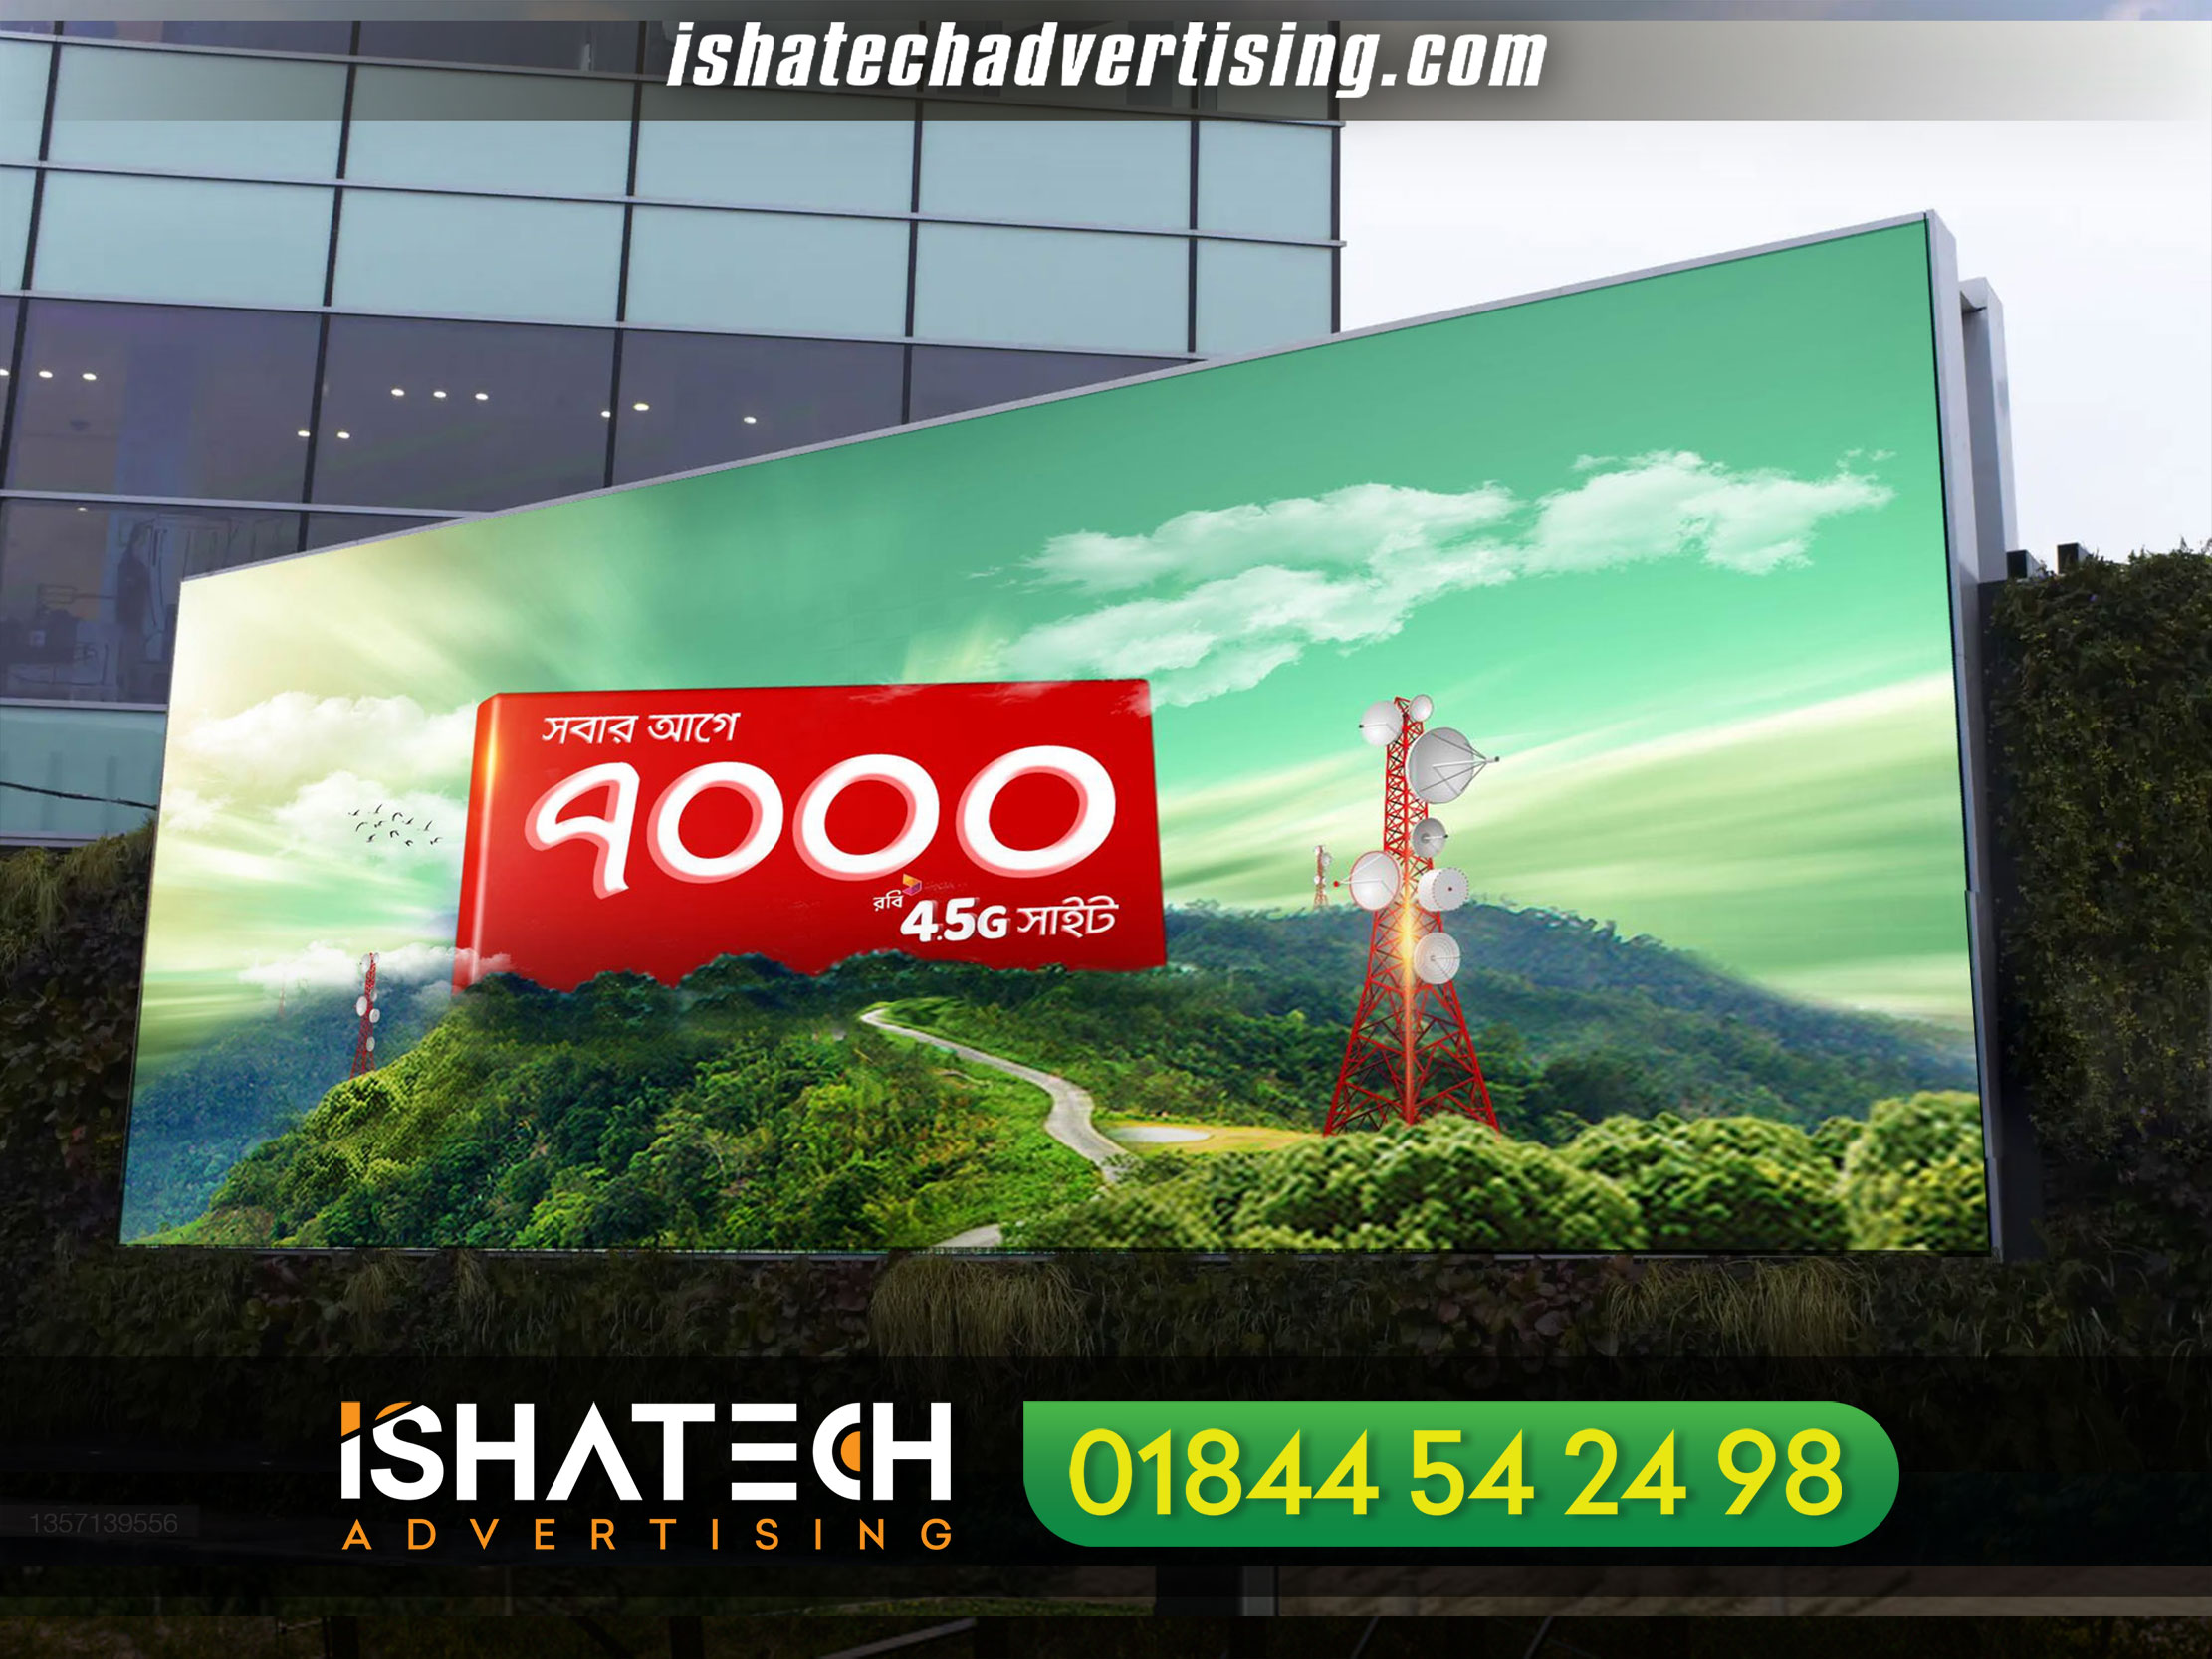 Led Billboard Making BD, Signboard Making BD, Officer Billboard BD, indoor billboard, Best Outdoor Billboard Making in Dhaka Bangladesh, Signboard BD, Best Domain Hosting Company in Dhaka, it Advertising Billboard, Billboard BD, Phone Company Billboard, Sim Company Billboard, Billboard BD, Billboard Ads Pro, Premier Cement Billboard Design, Real Estate Billboard, Project Billboard Advertising Steel Billboard Structure Steel Board Outdoor Signage, All Kind of #DigitalPrint Pana, PVC, Shop Sign, Name Plate, #Lighting Sign Board, #LEDSign, Neon Sign, Acrylic Sign, Moving Display, #Billboard, Radio Ad, #NewspaperAd, TV Ad, #FairStall & Event #Management Ad Etc. Hope You’re Interest! #neonsign #signboard #eventmanagement #signage #stall #digitalprint #sign #display #board #acrylic #neon #plate #ledsign #lighting #printing #graphicdesign #service #marketing #ad #branding #print #advertising #BillBoard #DigitalBoard #SteelBoard #LocalBoard #StandBoardNonlitBoard #Structure #Structural. top billboard advertising agency in dhaka bangladesh. top 10 billboard advertising agency in dhaka bangladesh. list of billboard advertising agency in dhaka bangladesh. billboard advertising agency in dhaka bangladesh price. best billboard advertising agency in dhaka bangladesh. billboard advertising cost in bangladesh. billboard advertising bd. billboard rent in dhaka. real estate billboard, project billboard making in Dhaka Bangladesh, Besl Led Billboard Making Company in Dhaka Bangladesh.